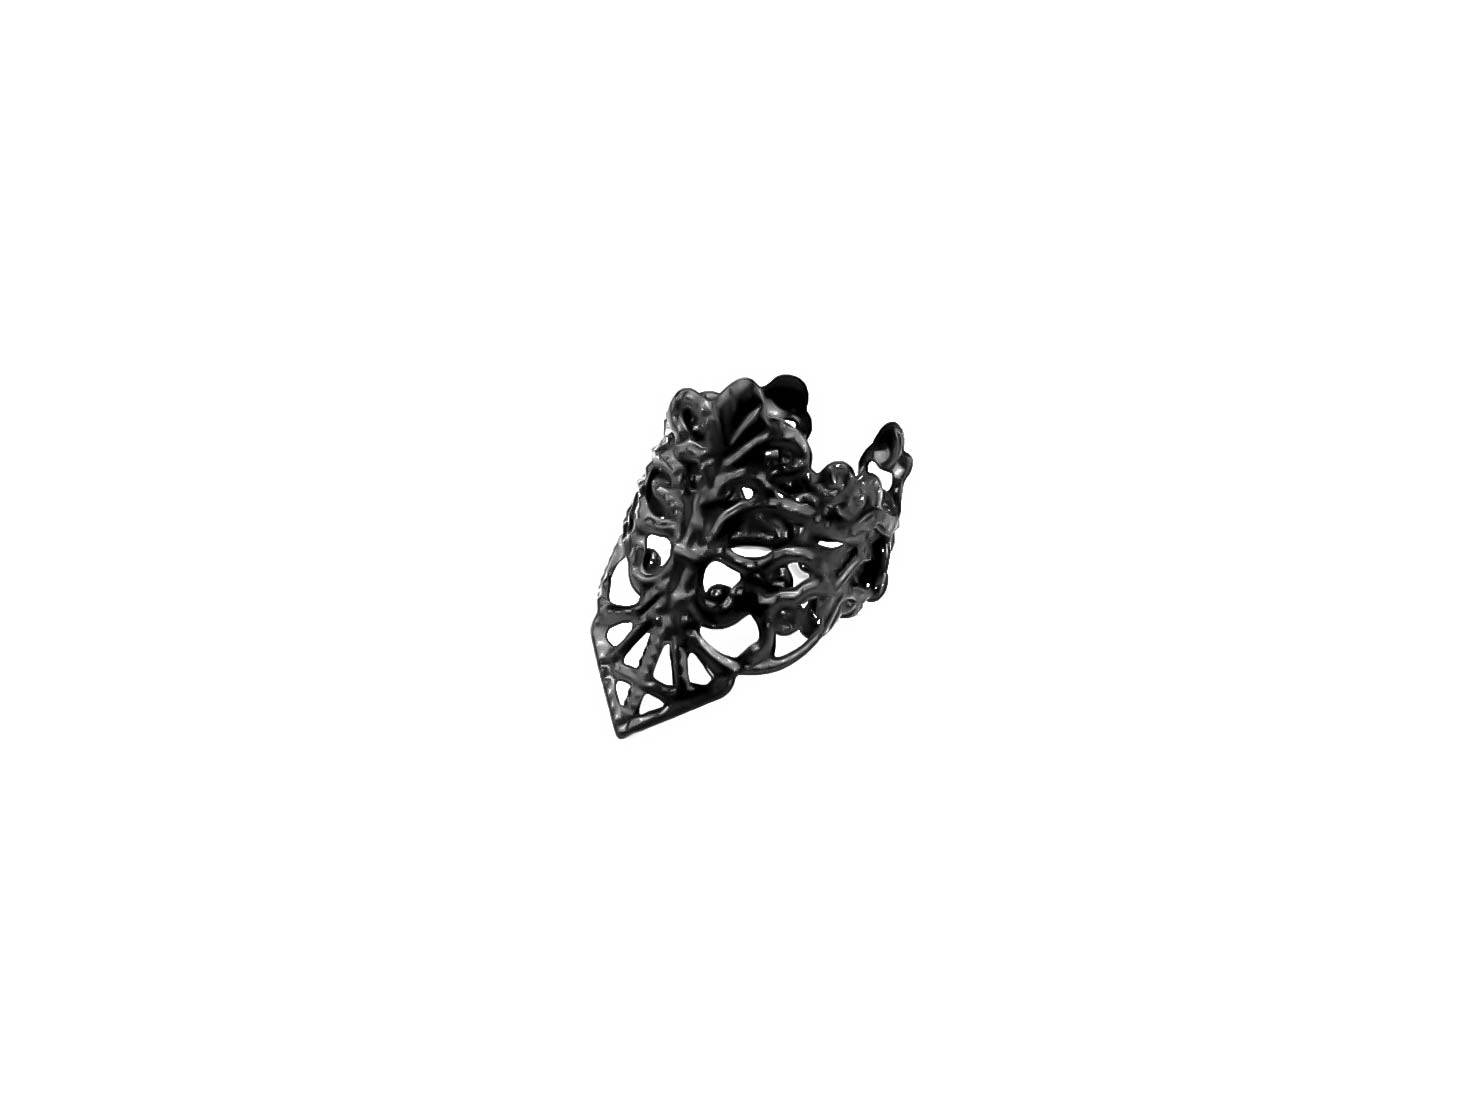 Intricate Myril Jewels gothic midi ring, a delicate yet bold piece perfect for enhancing any witchcore or neo-goth ensemble. A versatile accessory for Halloween, festivals, or as a statement piece for the avant-garde goth. Ideal as a gift for the goth girlfriend or a dramatic addition to everyday wear.